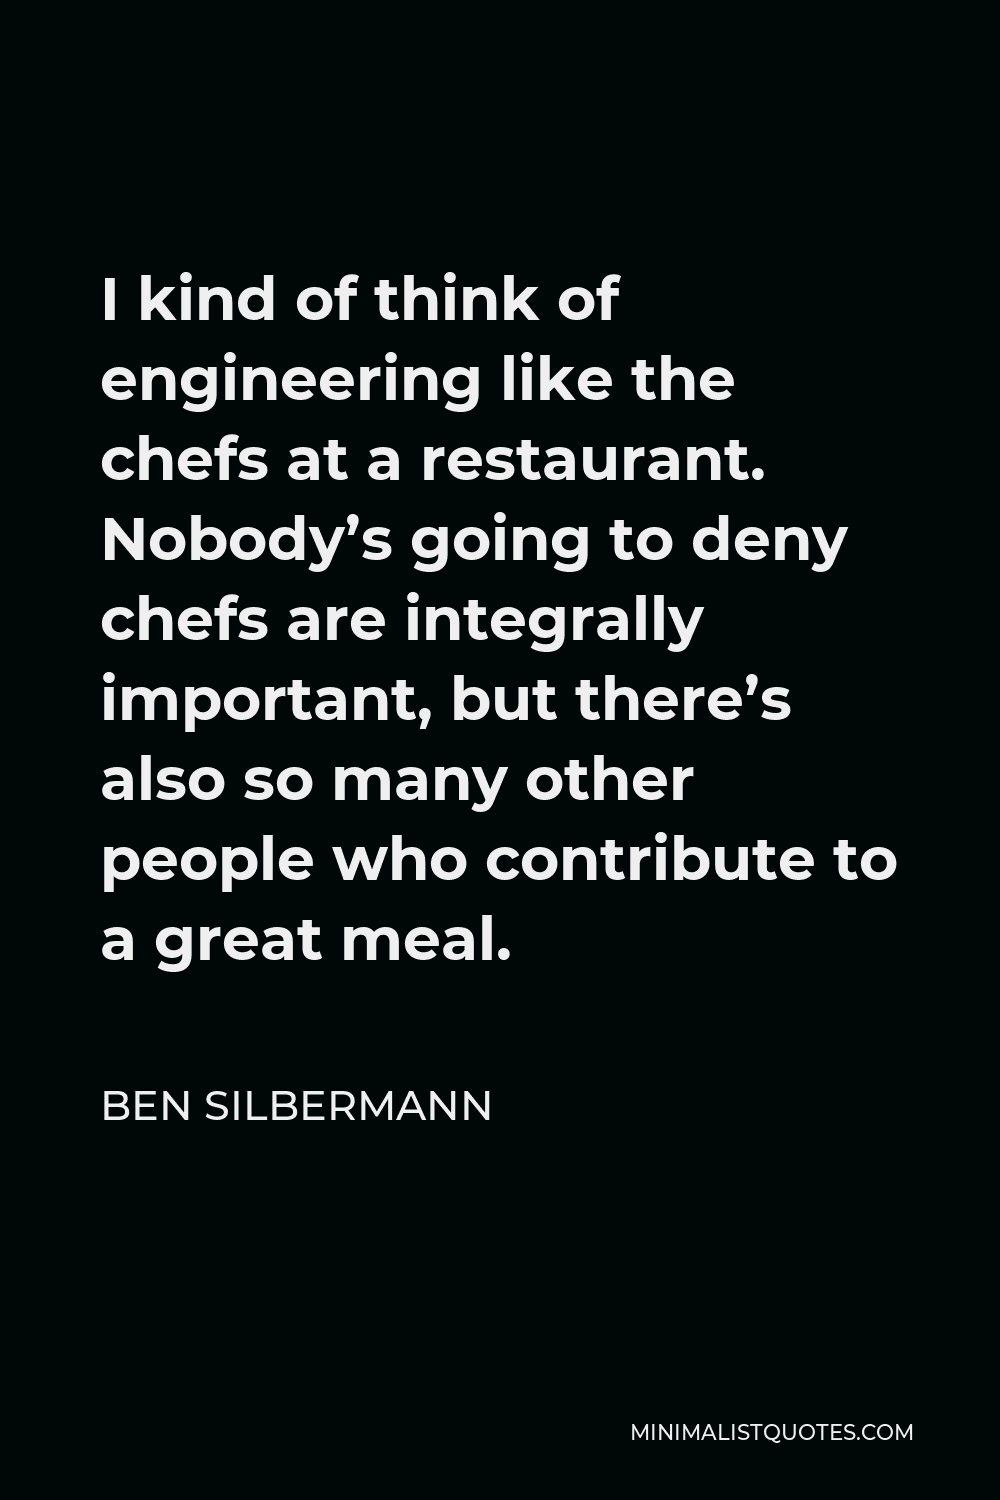 Ben Silbermann Quote - I kind of think of engineering like the chefs at a restaurant. Nobody’s going to deny chefs are integrally important, but there’s also so many other people who contribute to a great meal.